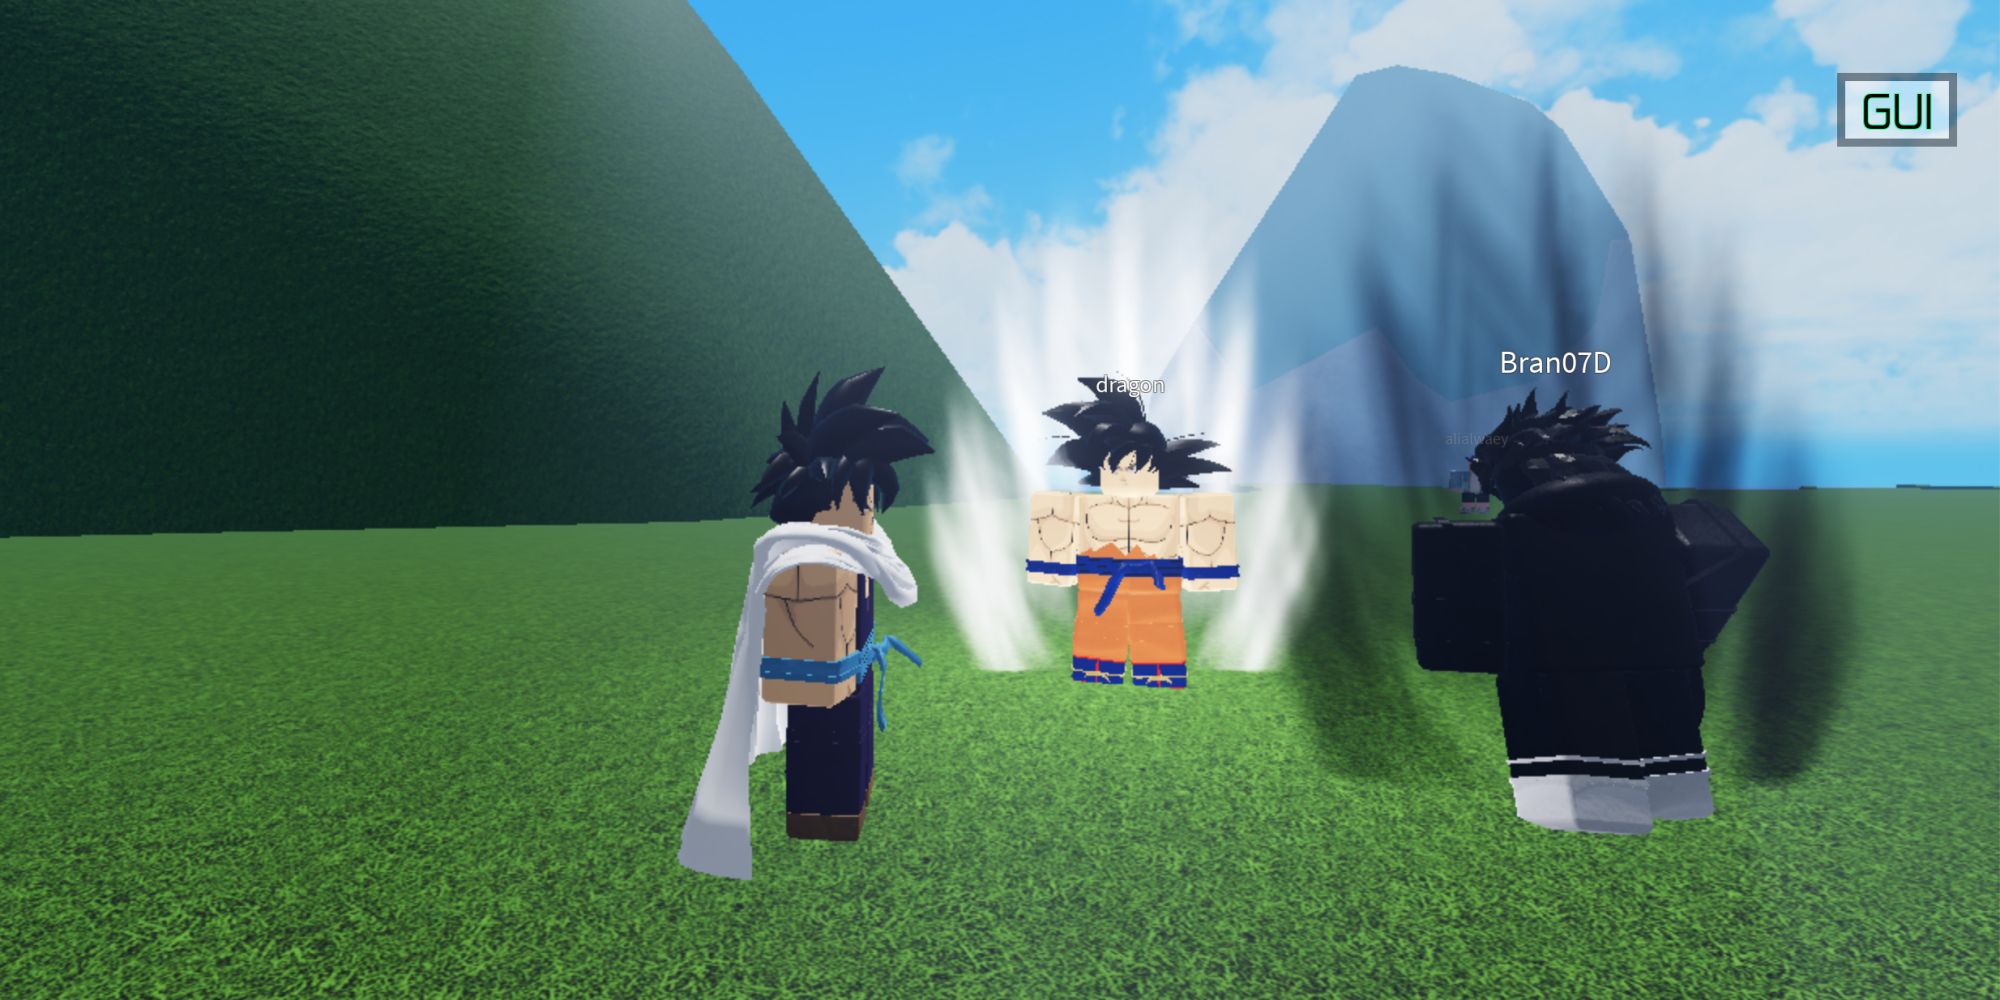 Three Roblox players standing together in Dragon Ball RP, one as Goku and the other as Gohan